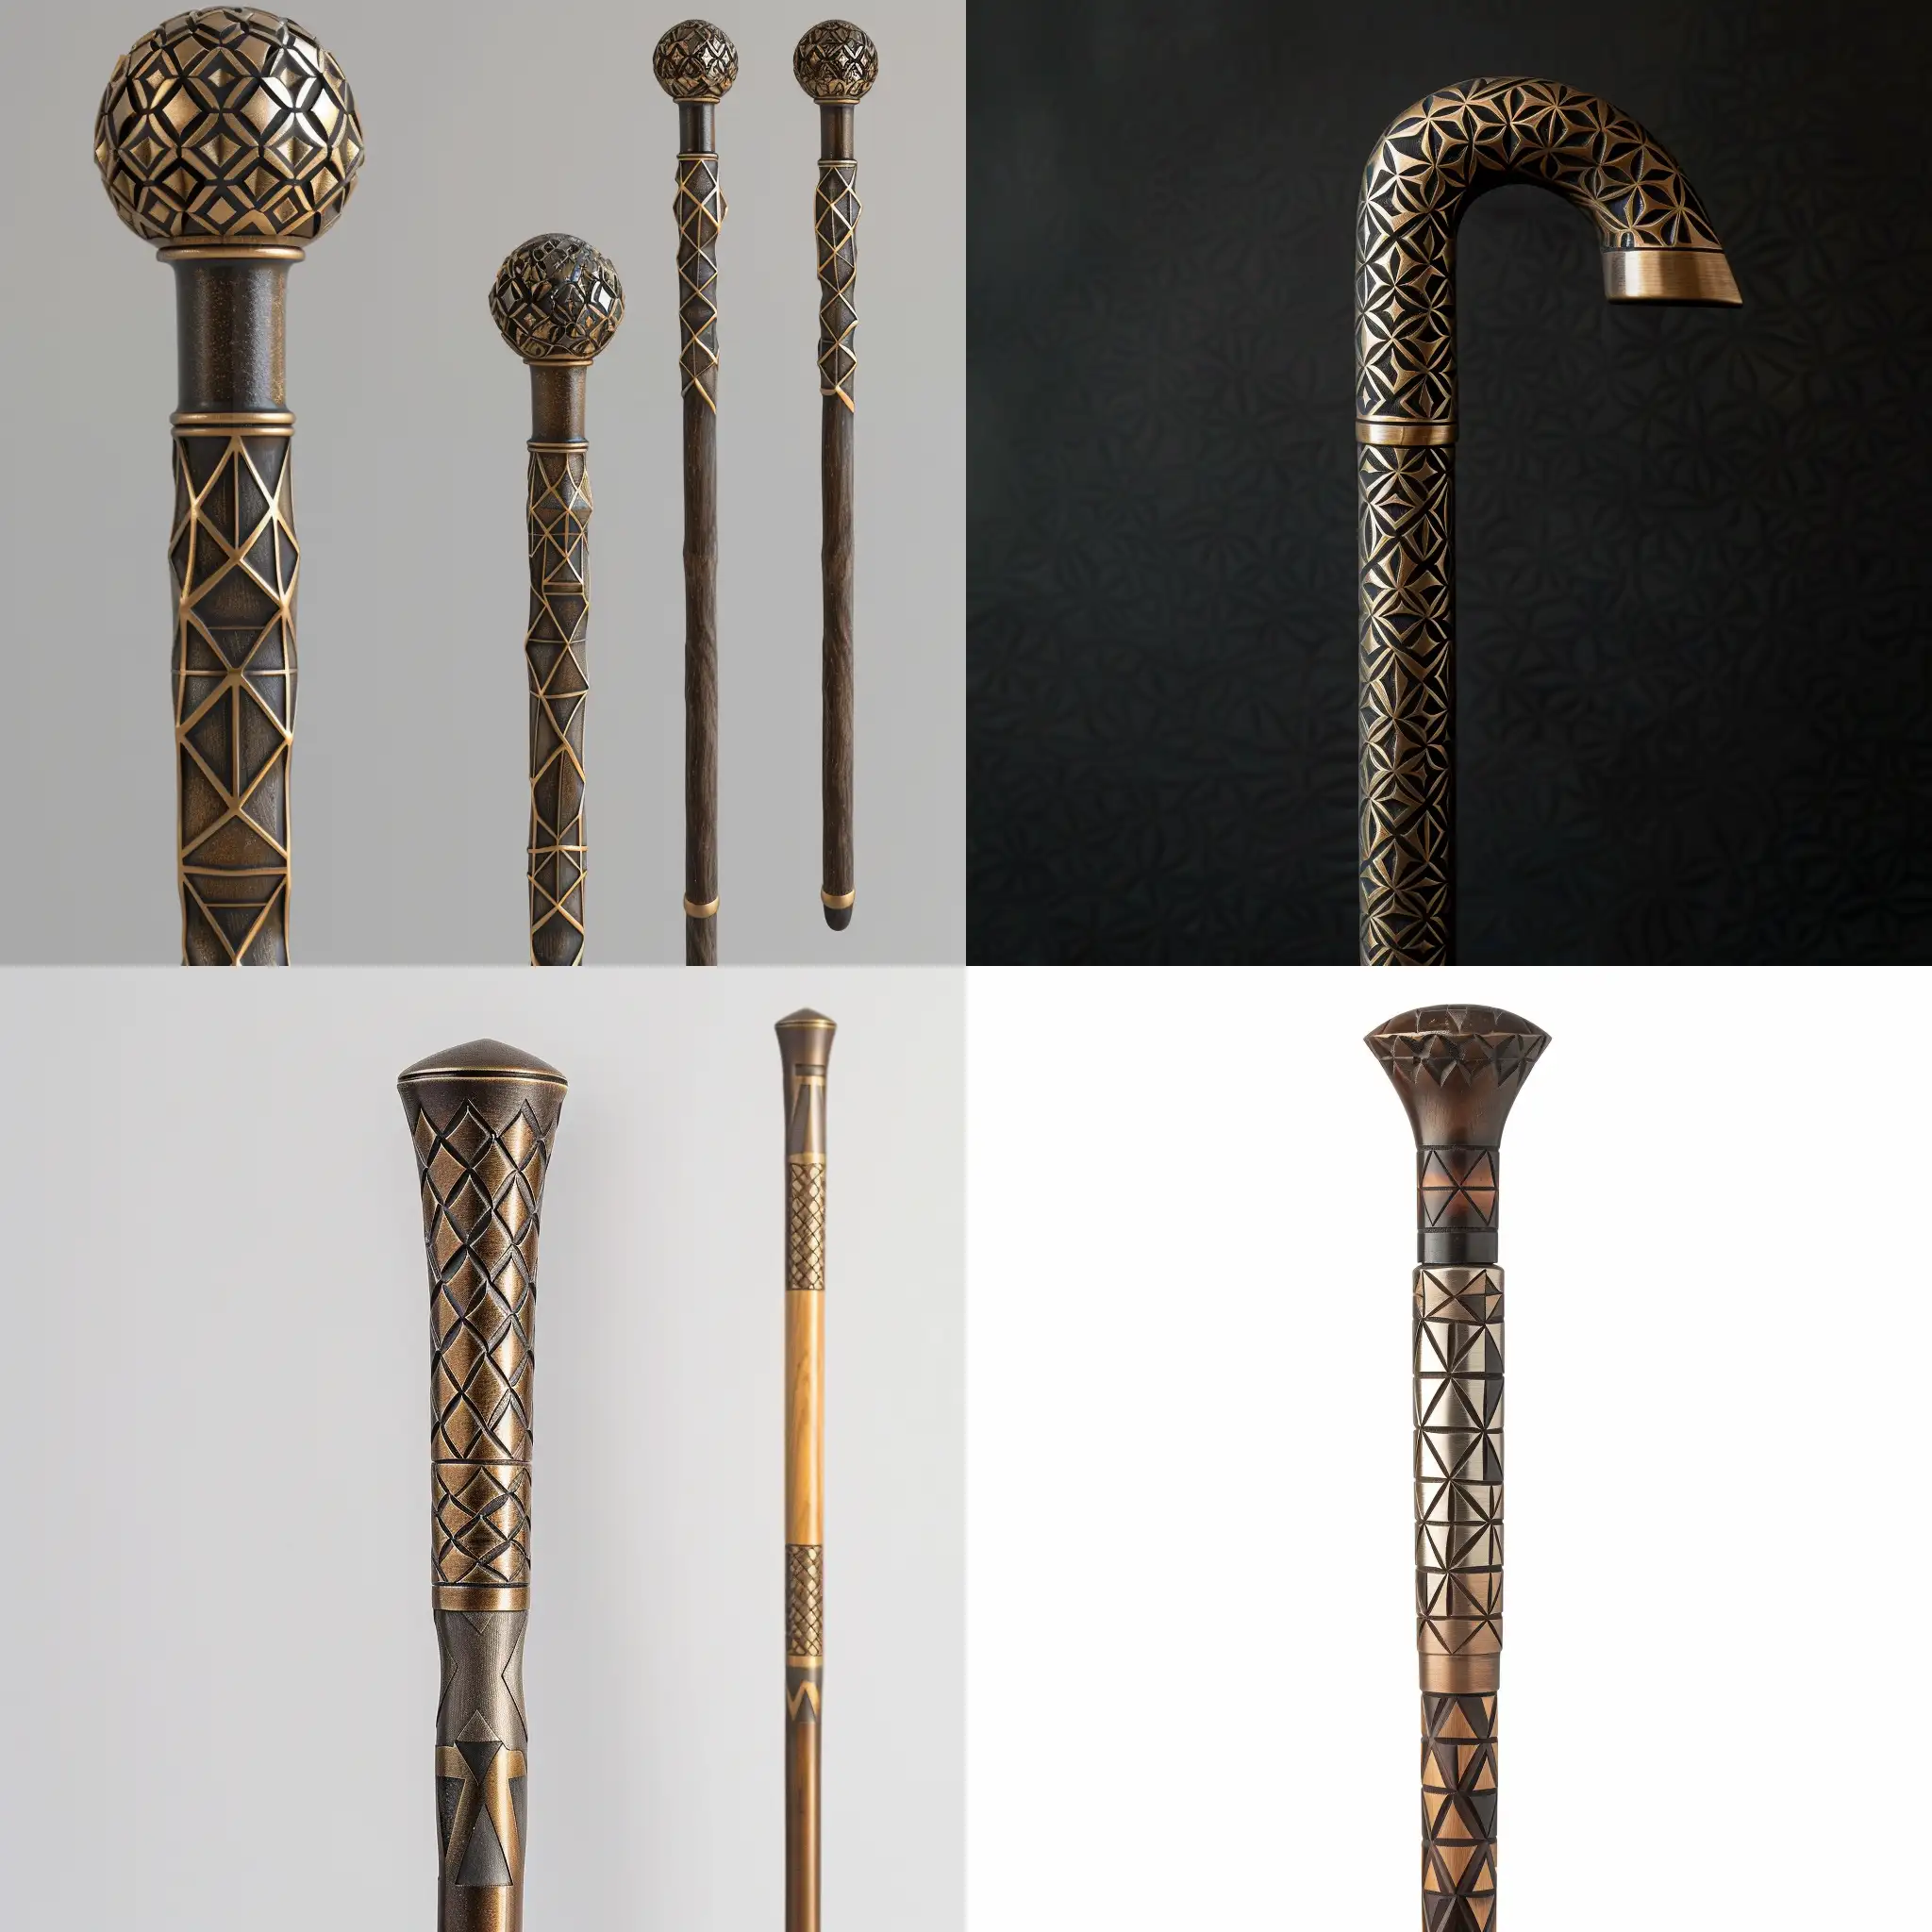 Cane with geometric patterns, Mackintosh style, the head of the cane is made of bronze, the shaft tree is oak, hd, detailed